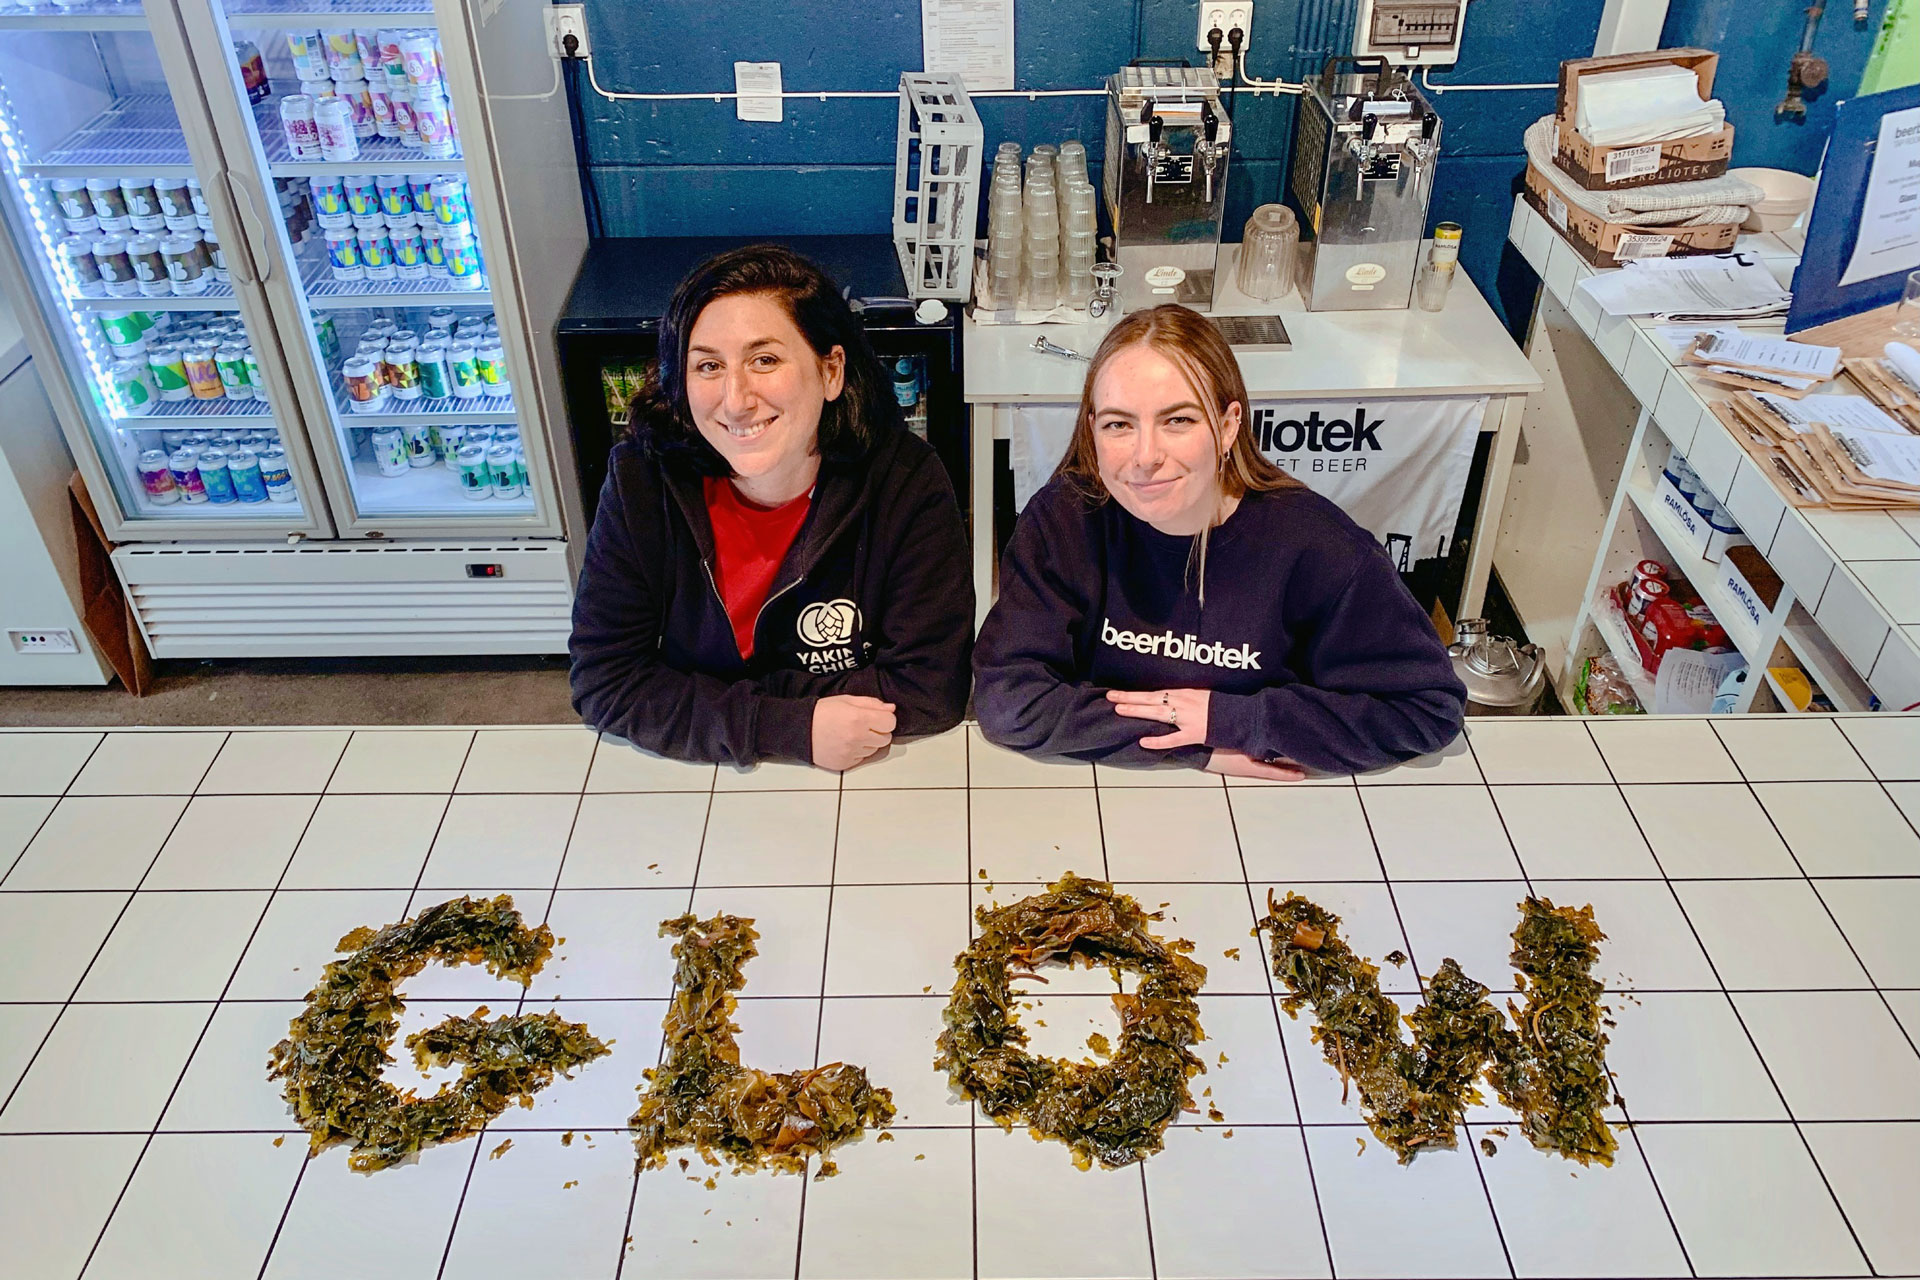 Madison Simpson, from Beerbliotek, and Connie Dickinson, from Yakima Chief Hops, taking part in the GLOWALONG project 2021. Created by organisation G.L.O.W - The Global Ladies of Wort. The collaboration beer is a Kveik IPA, brewed by Beerbliotek, a Swedish Craft Brewery based in Gothenburg, Sweden.